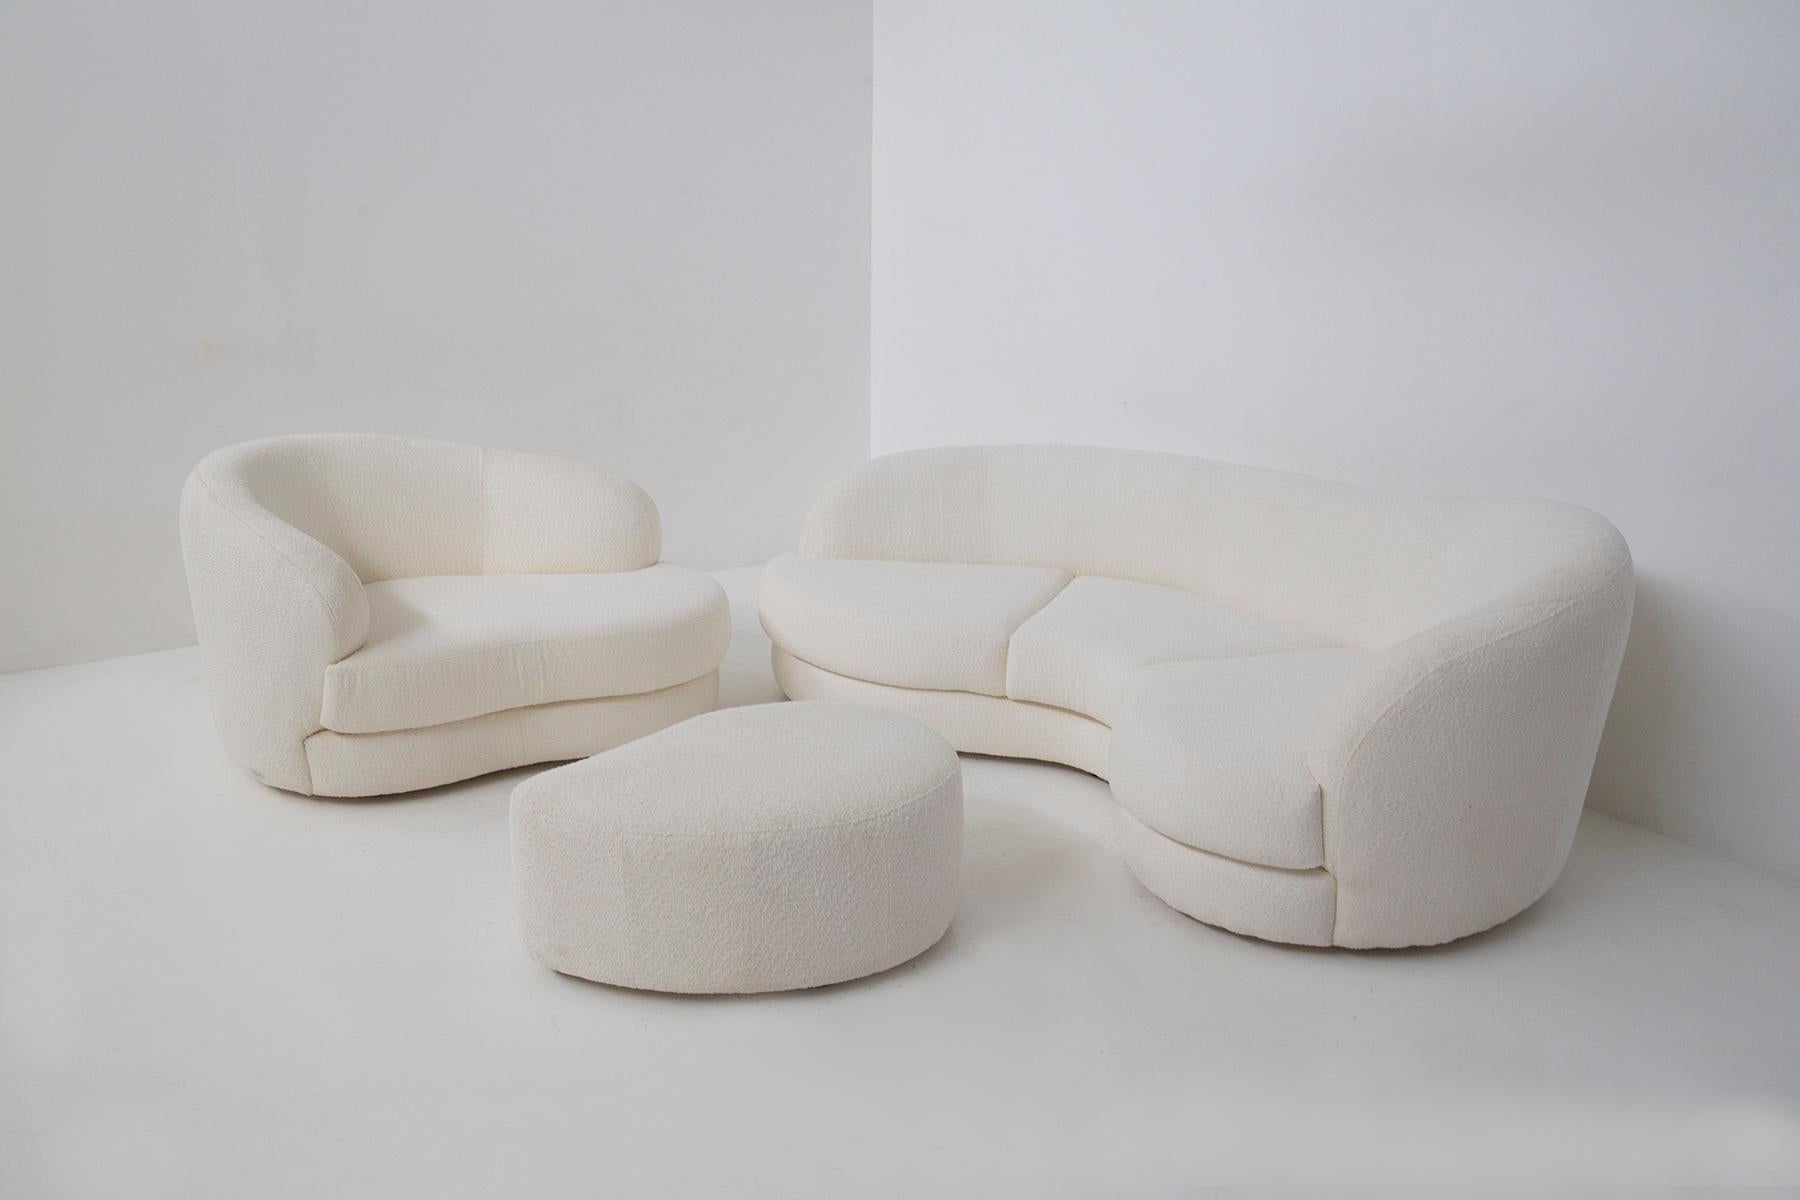 Allow me to introduce you to a truly exquisite vintage Italian lounge set from the 1950s, a harmonious trio consisting of a sofa, an armchair, and an ottoman, all elegantly adorned in lustrous white bouclé.

This set is a testament to the perfect